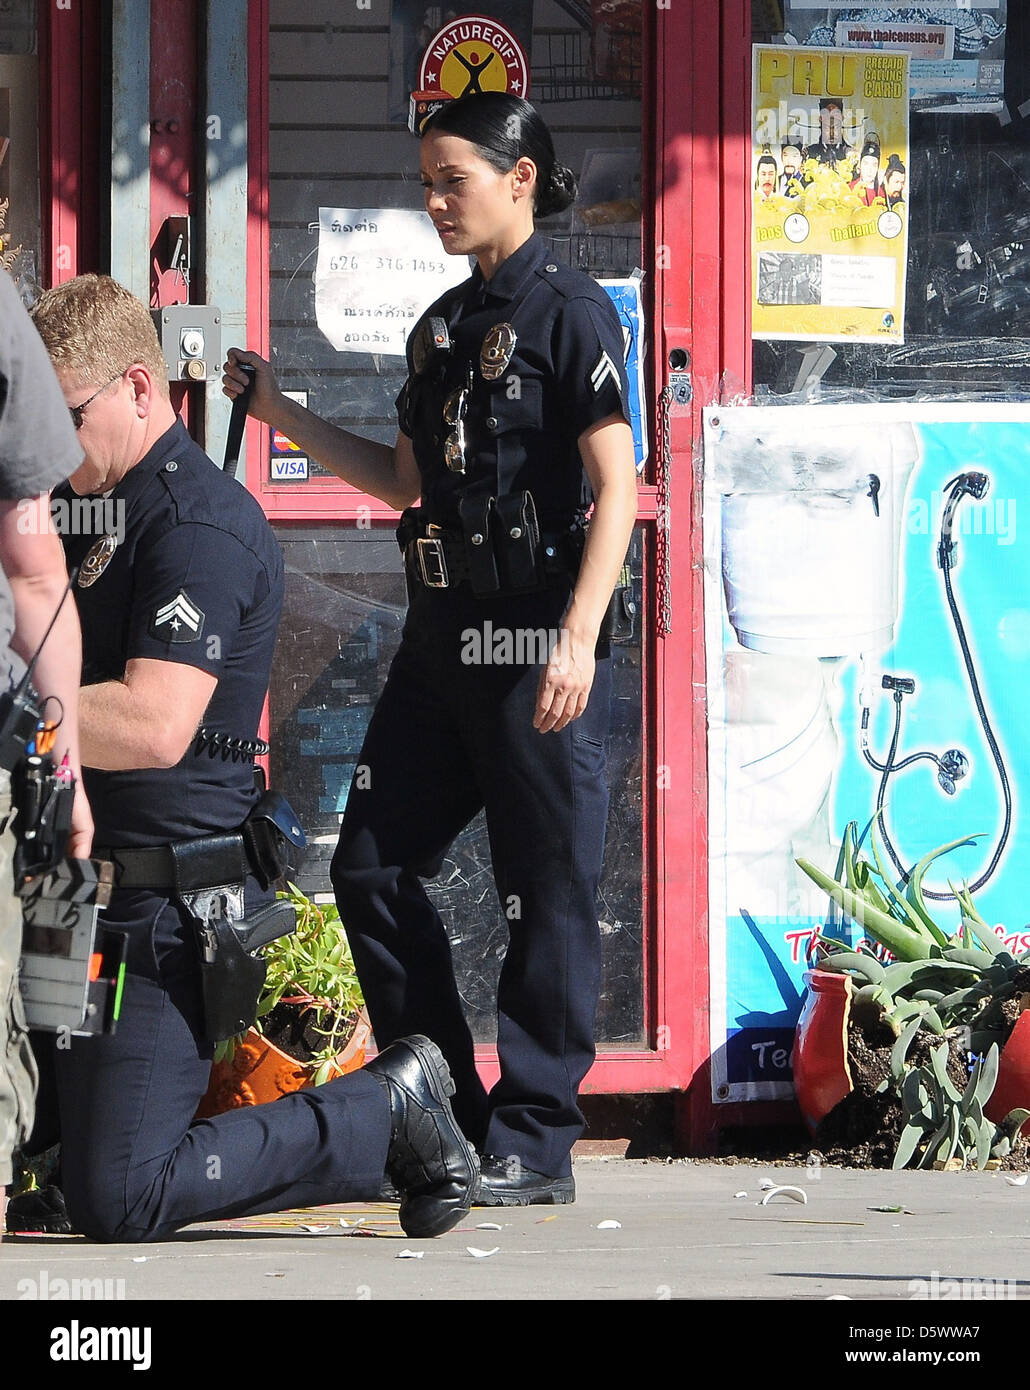 Lucy Liu dresses as a police officer on the set of the television show ' Southland' Los Angeles, California - 08.02.12 Stock Photo - Alamy